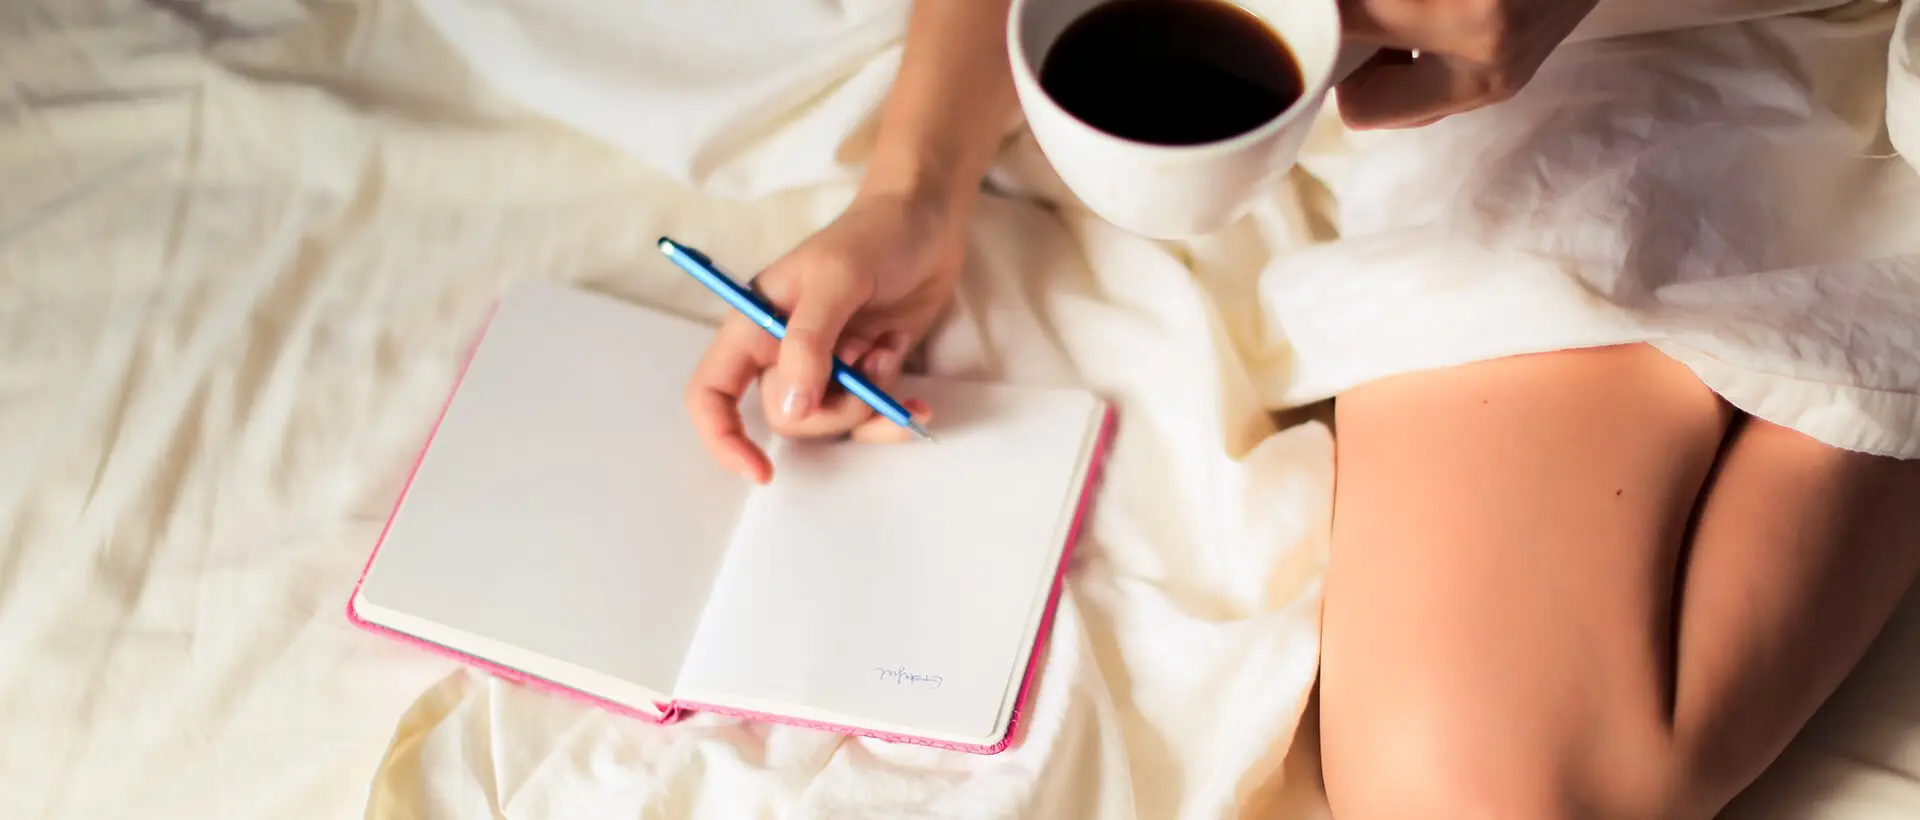 a woman sitting on a bed holding a cup of coffee and writing on a notebook.